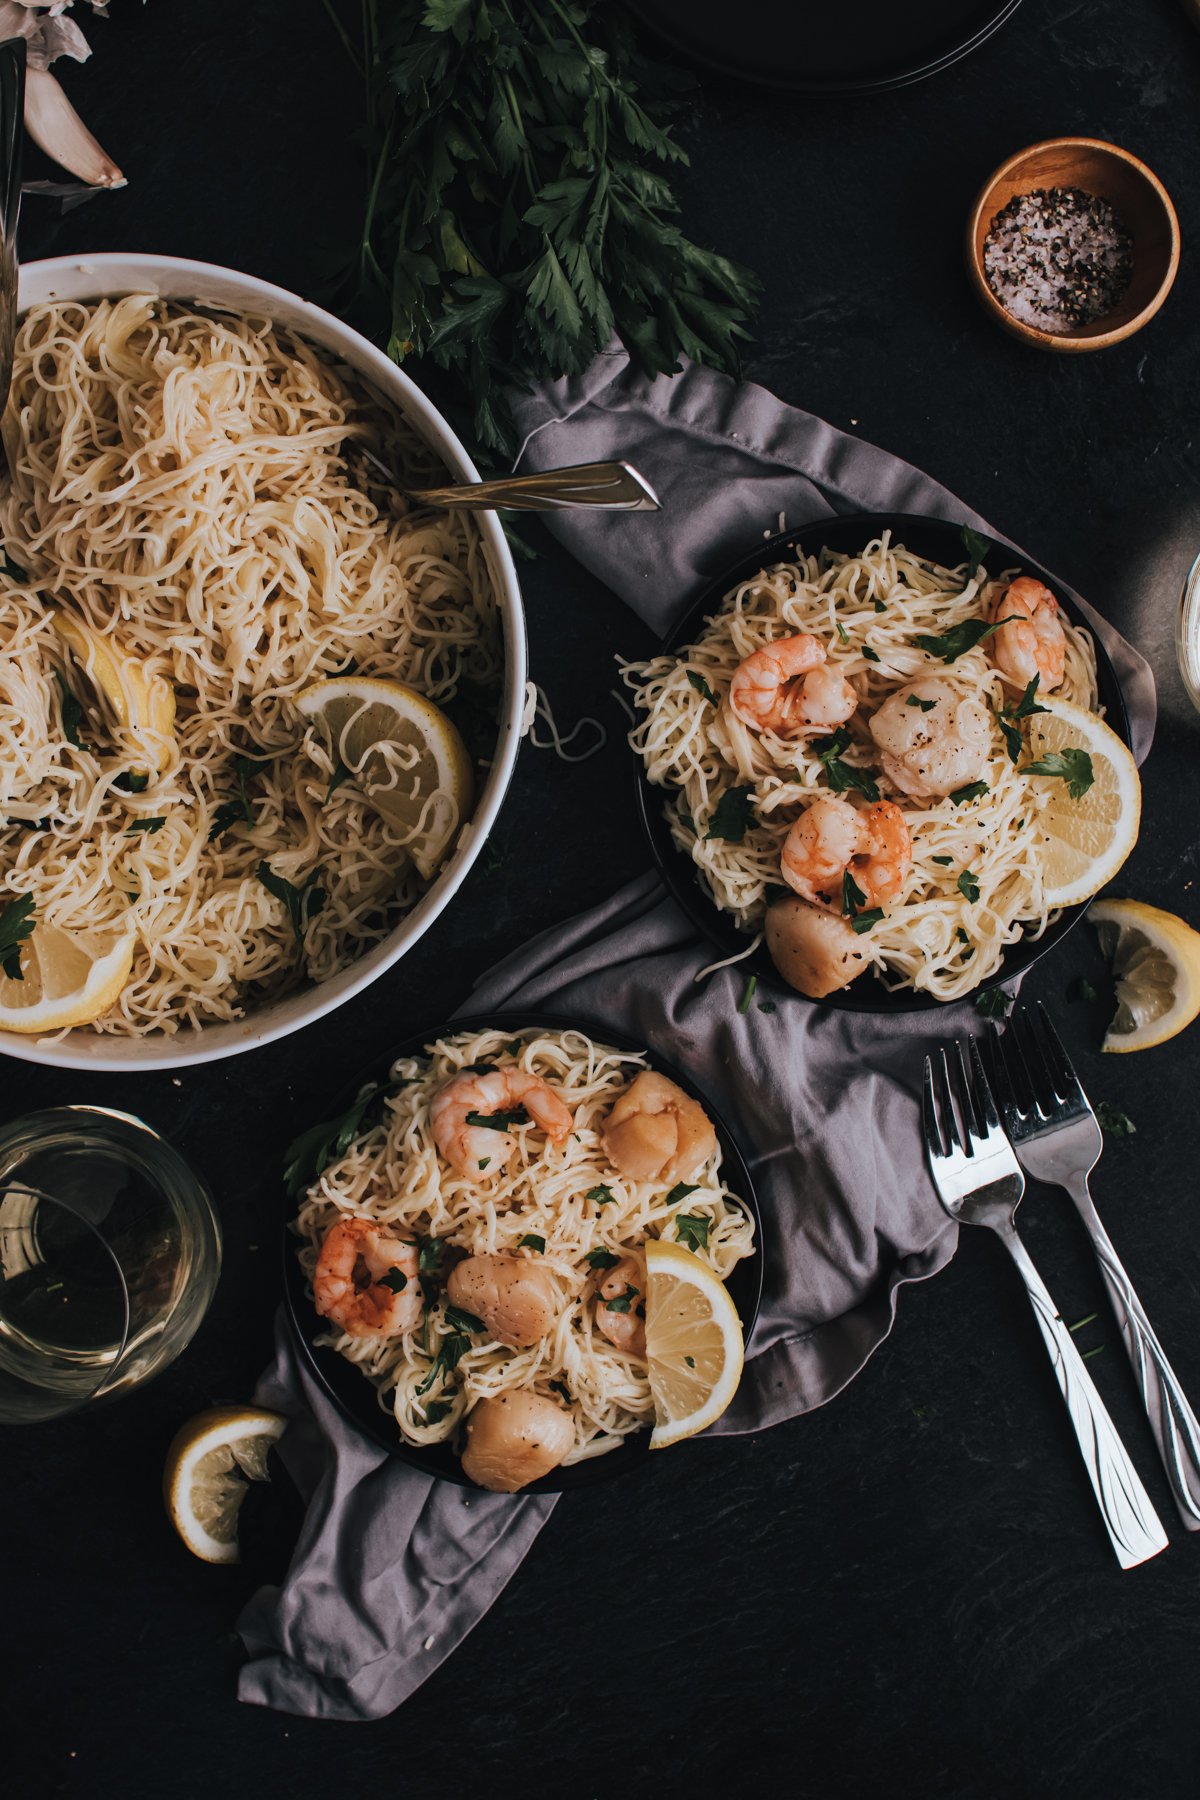 Plates full of this pasta and seafood dish with forks and lemon wedges ready to be enjoyed. 